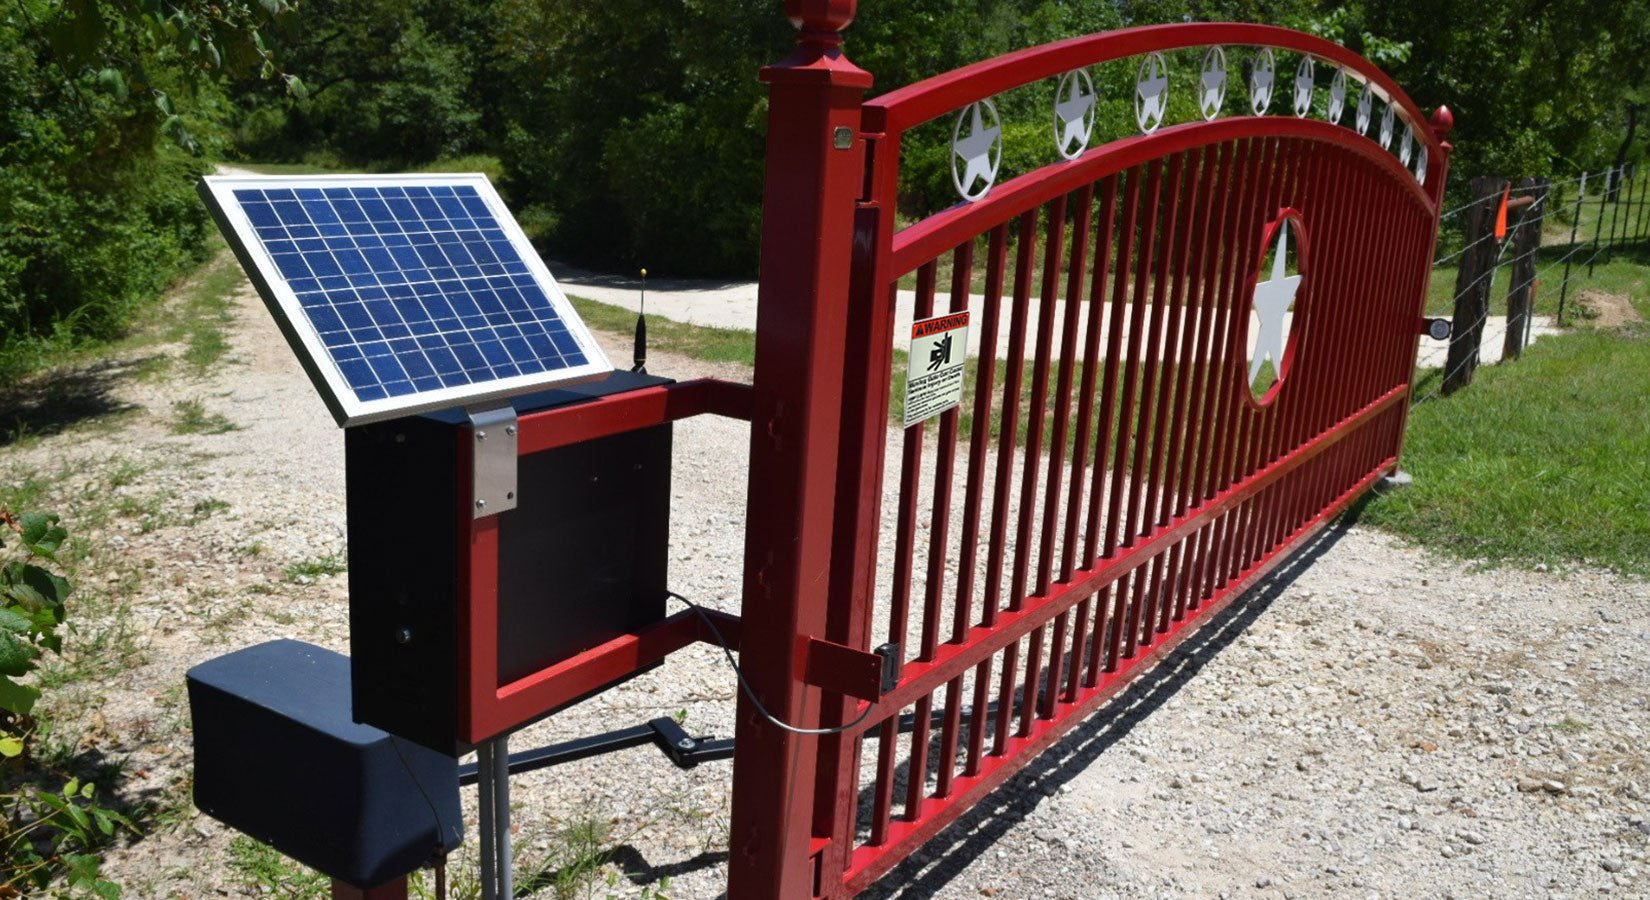 The 4 Best Solar Gate Openers 2021 Reviews & Buying Guide | All Security Equipment